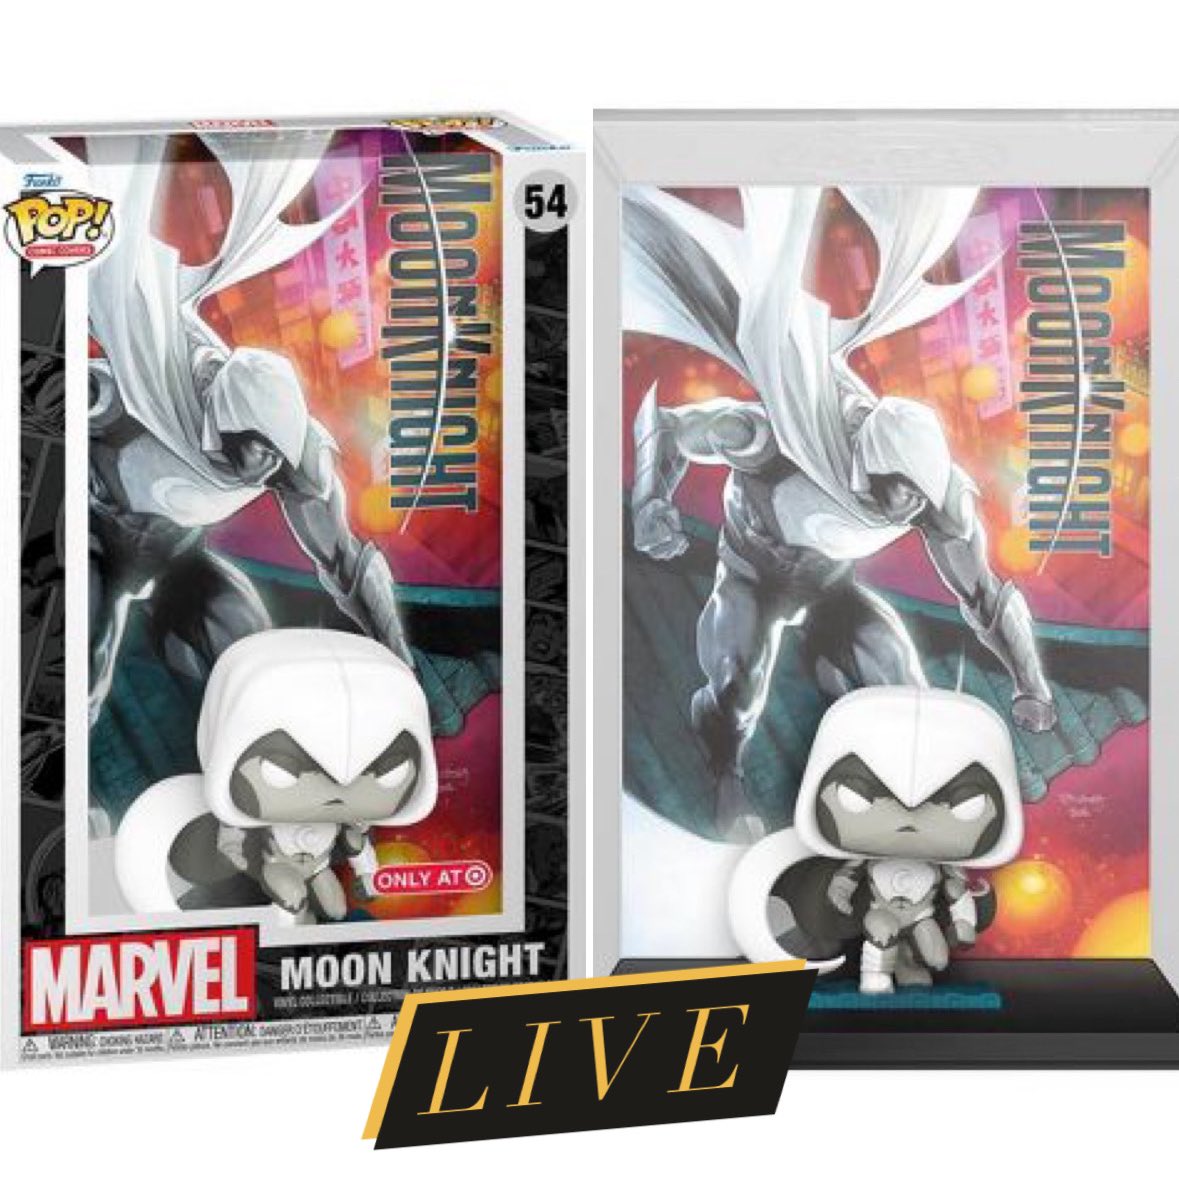 The new Moon Knight Funko POP! Comic Cover is available below! Grab this Target exclusive ~
Linky ~ fnkpp.com/TS
#Ad #MoonKnight #FPN #FunkoPOPNews #Funko #POP #POPVinyl #FunkoPOP #FunkoSoda